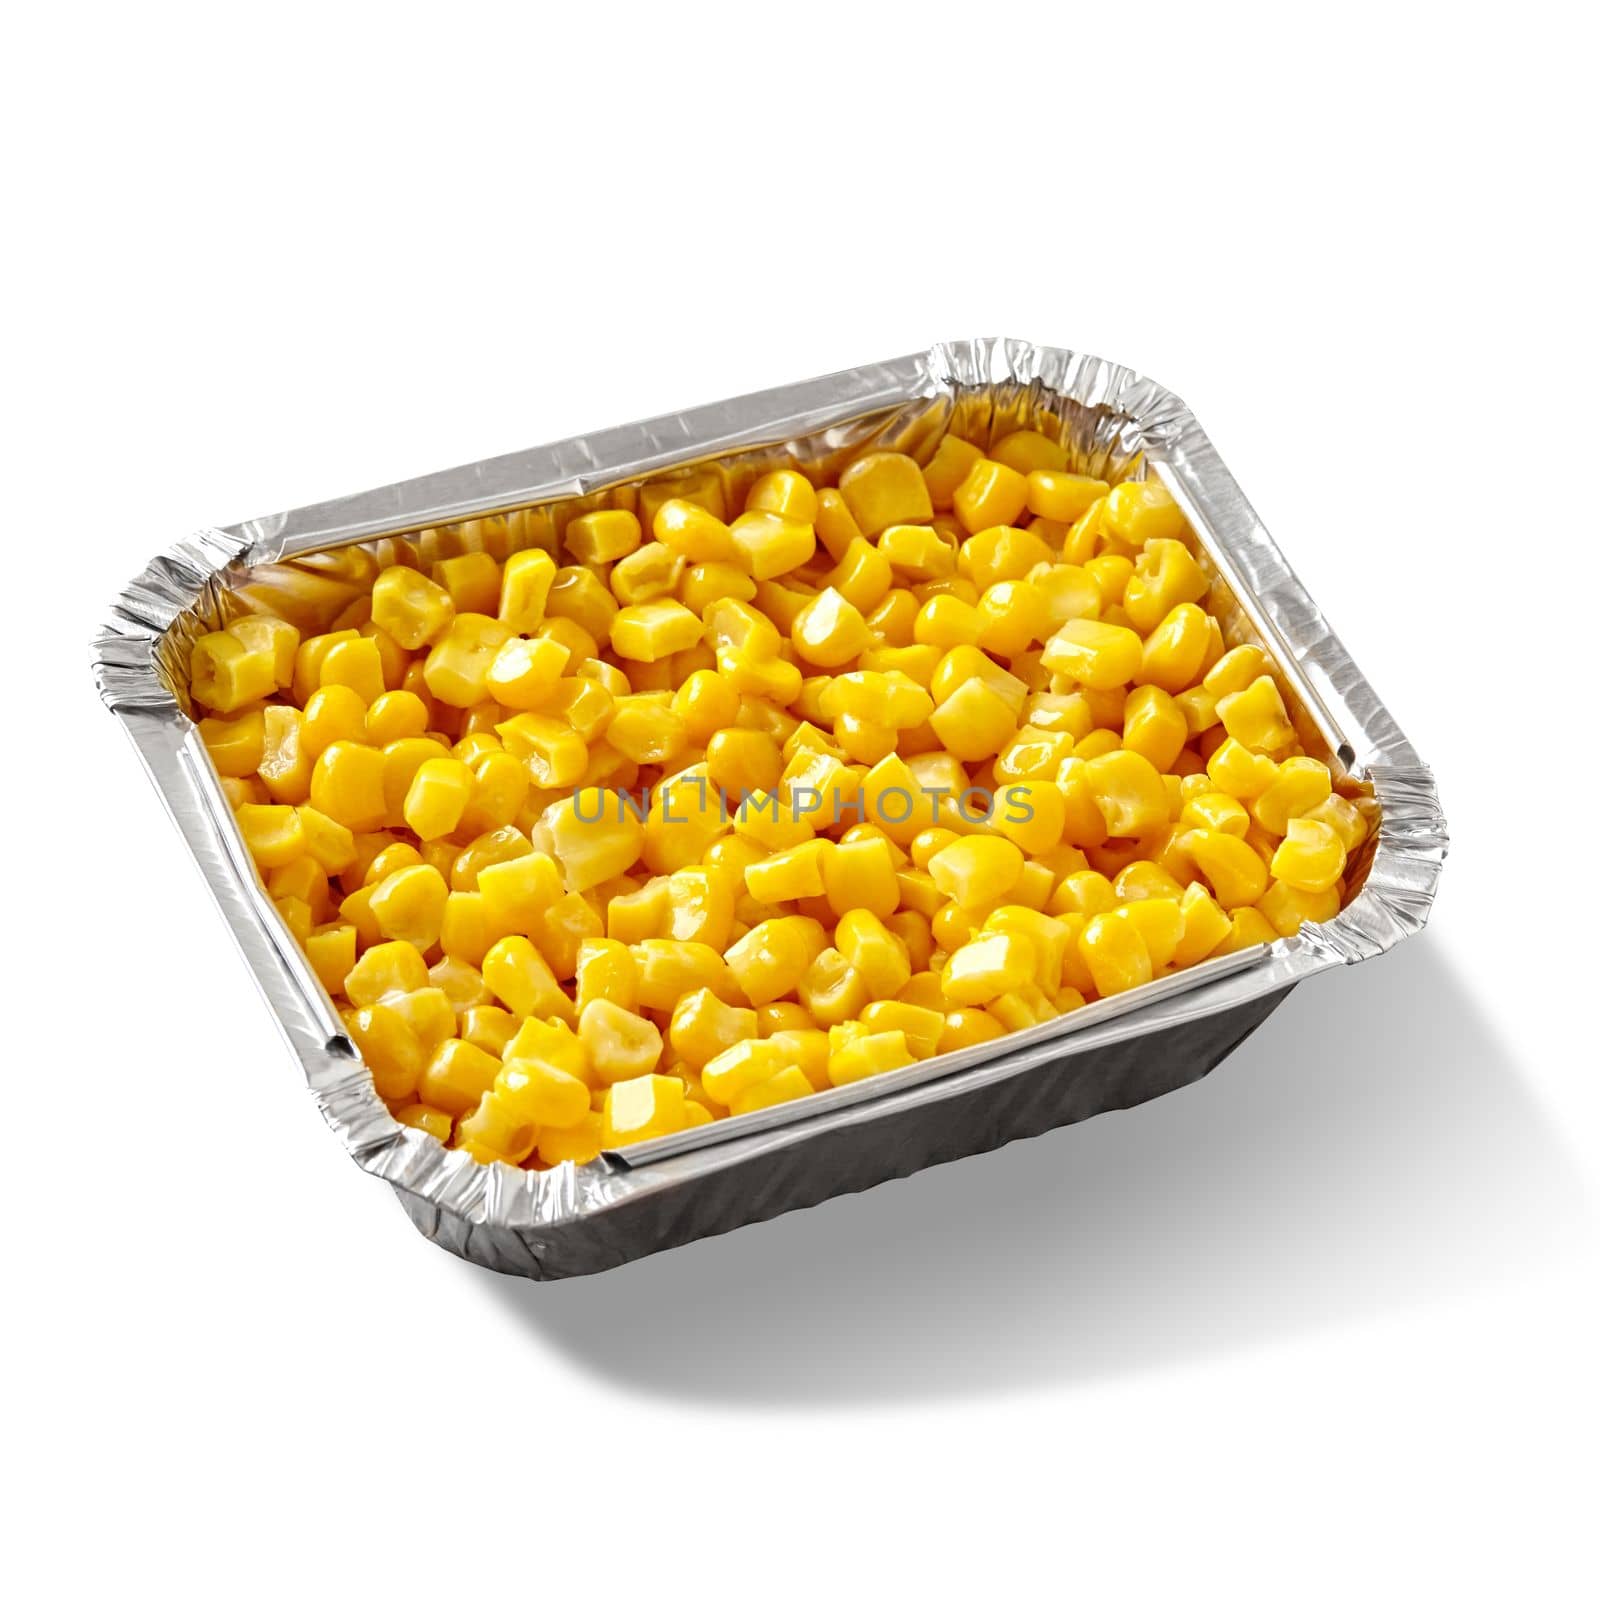 Boiled corn kernels in aluminium foil container isolated on white background by nazarovsergey